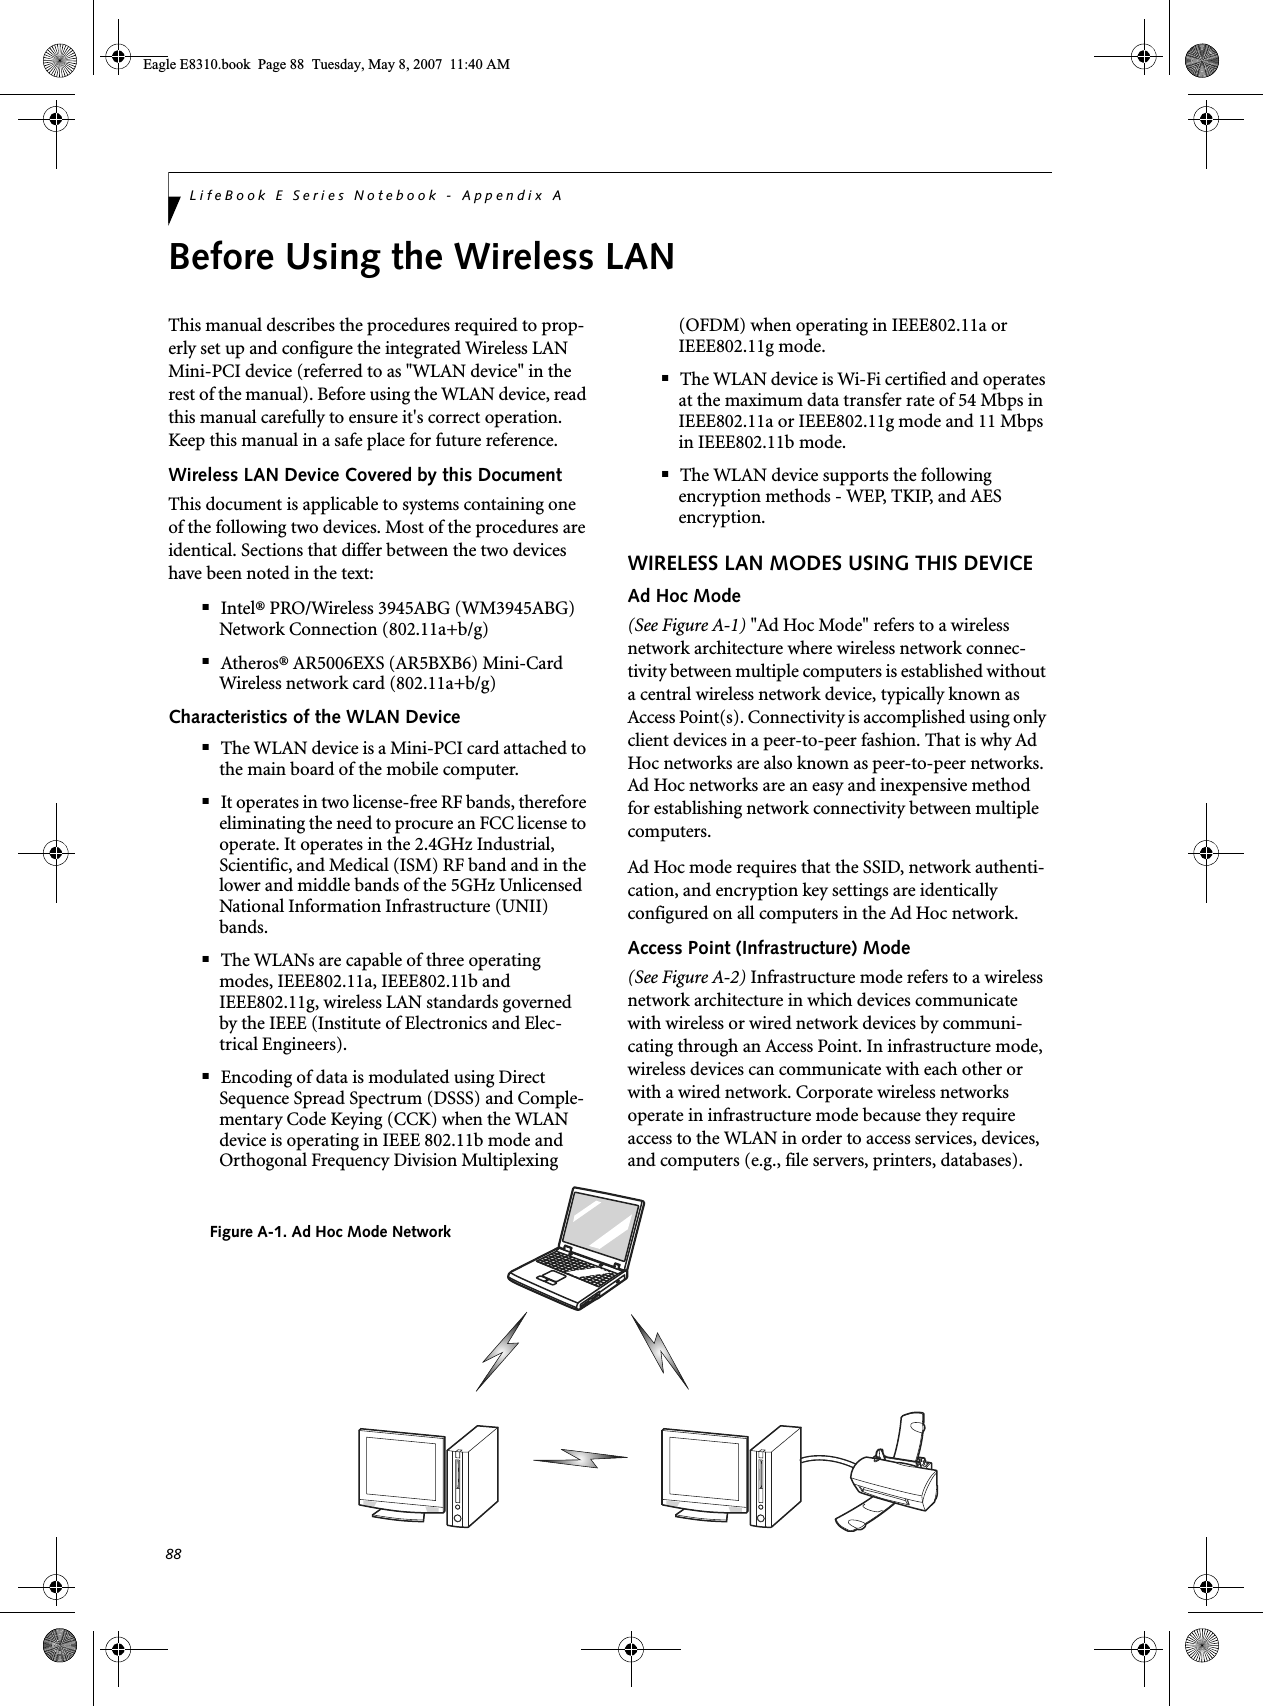 88LifeBook E Series Notebook - Appendix ABefore Using the Wireless LANThis manual describes the procedures required to prop-erly set up and configure the integrated Wireless LAN Mini-PCI device (referred to as &quot;WLAN device&quot; in the rest of the manual). Before using the WLAN device, read this manual carefully to ensure it&apos;s correct operation. Keep this manual in a safe place for future reference.Wireless LAN Device Covered by this DocumentThis document is applicable to systems containing one of the following two devices. Most of the procedures are identical. Sections that differ between the two devices have been noted in the text:■Intel® PRO/Wireless 3945ABG (WM3945ABG) Network Connection (802.11a+b/g) ■Atheros® AR5006EXS (AR5BXB6) Mini-Card Wireless network card (802.11a+b/g) Characteristics of the WLAN Device■The WLAN device is a Mini-PCI card attached to the main board of the mobile computer. ■It operates in two license-free RF bands, therefore eliminating the need to procure an FCC license to operate. It operates in the 2.4GHz Industrial, Scientific, and Medical (ISM) RF band and in the lower and middle bands of the 5GHz Unlicensed National Information Infrastructure (UNII) bands. ■The WLANs are capable of three operating modes, IEEE802.11a, IEEE802.11b and IEEE802.11g, wireless LAN standards governed by the IEEE (Institute of Electronics and Elec-trical Engineers). ■Encoding of data is modulated using Direct Sequence Spread Spectrum (DSSS) and Comple-mentary Code Keying (CCK) when the WLAN device is operating in IEEE 802.11b mode and Orthogonal Frequency Division Multiplexing (OFDM) when operating in IEEE802.11a or IEEE802.11g mode. ■The WLAN device is Wi-Fi certified and operates at the maximum data transfer rate of 54 Mbps in IEEE802.11a or IEEE802.11g mode and 11 Mbps in IEEE802.11b mode.■The WLAN device supports the following encryption methods - WEP, TKIP, and AES encryption.WIRELESS LAN MODES USING THIS DEVICEAd Hoc Mode (See Figure A-1) &quot;Ad Hoc Mode&quot; refers to a wireless network architecture where wireless network connec-tivity between multiple computers is established without a central wireless network device, typically known as Access Point(s). Connectivity is accomplished using only client devices in a peer-to-peer fashion. That is why Ad Hoc networks are also known as peer-to-peer networks. Ad Hoc networks are an easy and inexpensive method for establishing network connectivity between multiple computers.Ad Hoc mode requires that the SSID, network authenti-cation, and encryption key settings are identically configured on all computers in the Ad Hoc network. Access Point (Infrastructure) Mode (See Figure A-2) Infrastructure mode refers to a wireless network architecture in which devices communicate with wireless or wired network devices by communi-cating through an Access Point. In infrastructure mode, wireless devices can communicate with each other or with a wired network. Corporate wireless networks operate in infrastructure mode because they require access to the WLAN in order to access services, devices, and computers (e.g., file servers, printers, databases).Figure A-1. Ad Hoc Mode NetworkEagle E8310.book  Page 88  Tuesday, May 8, 2007  11:40 AM